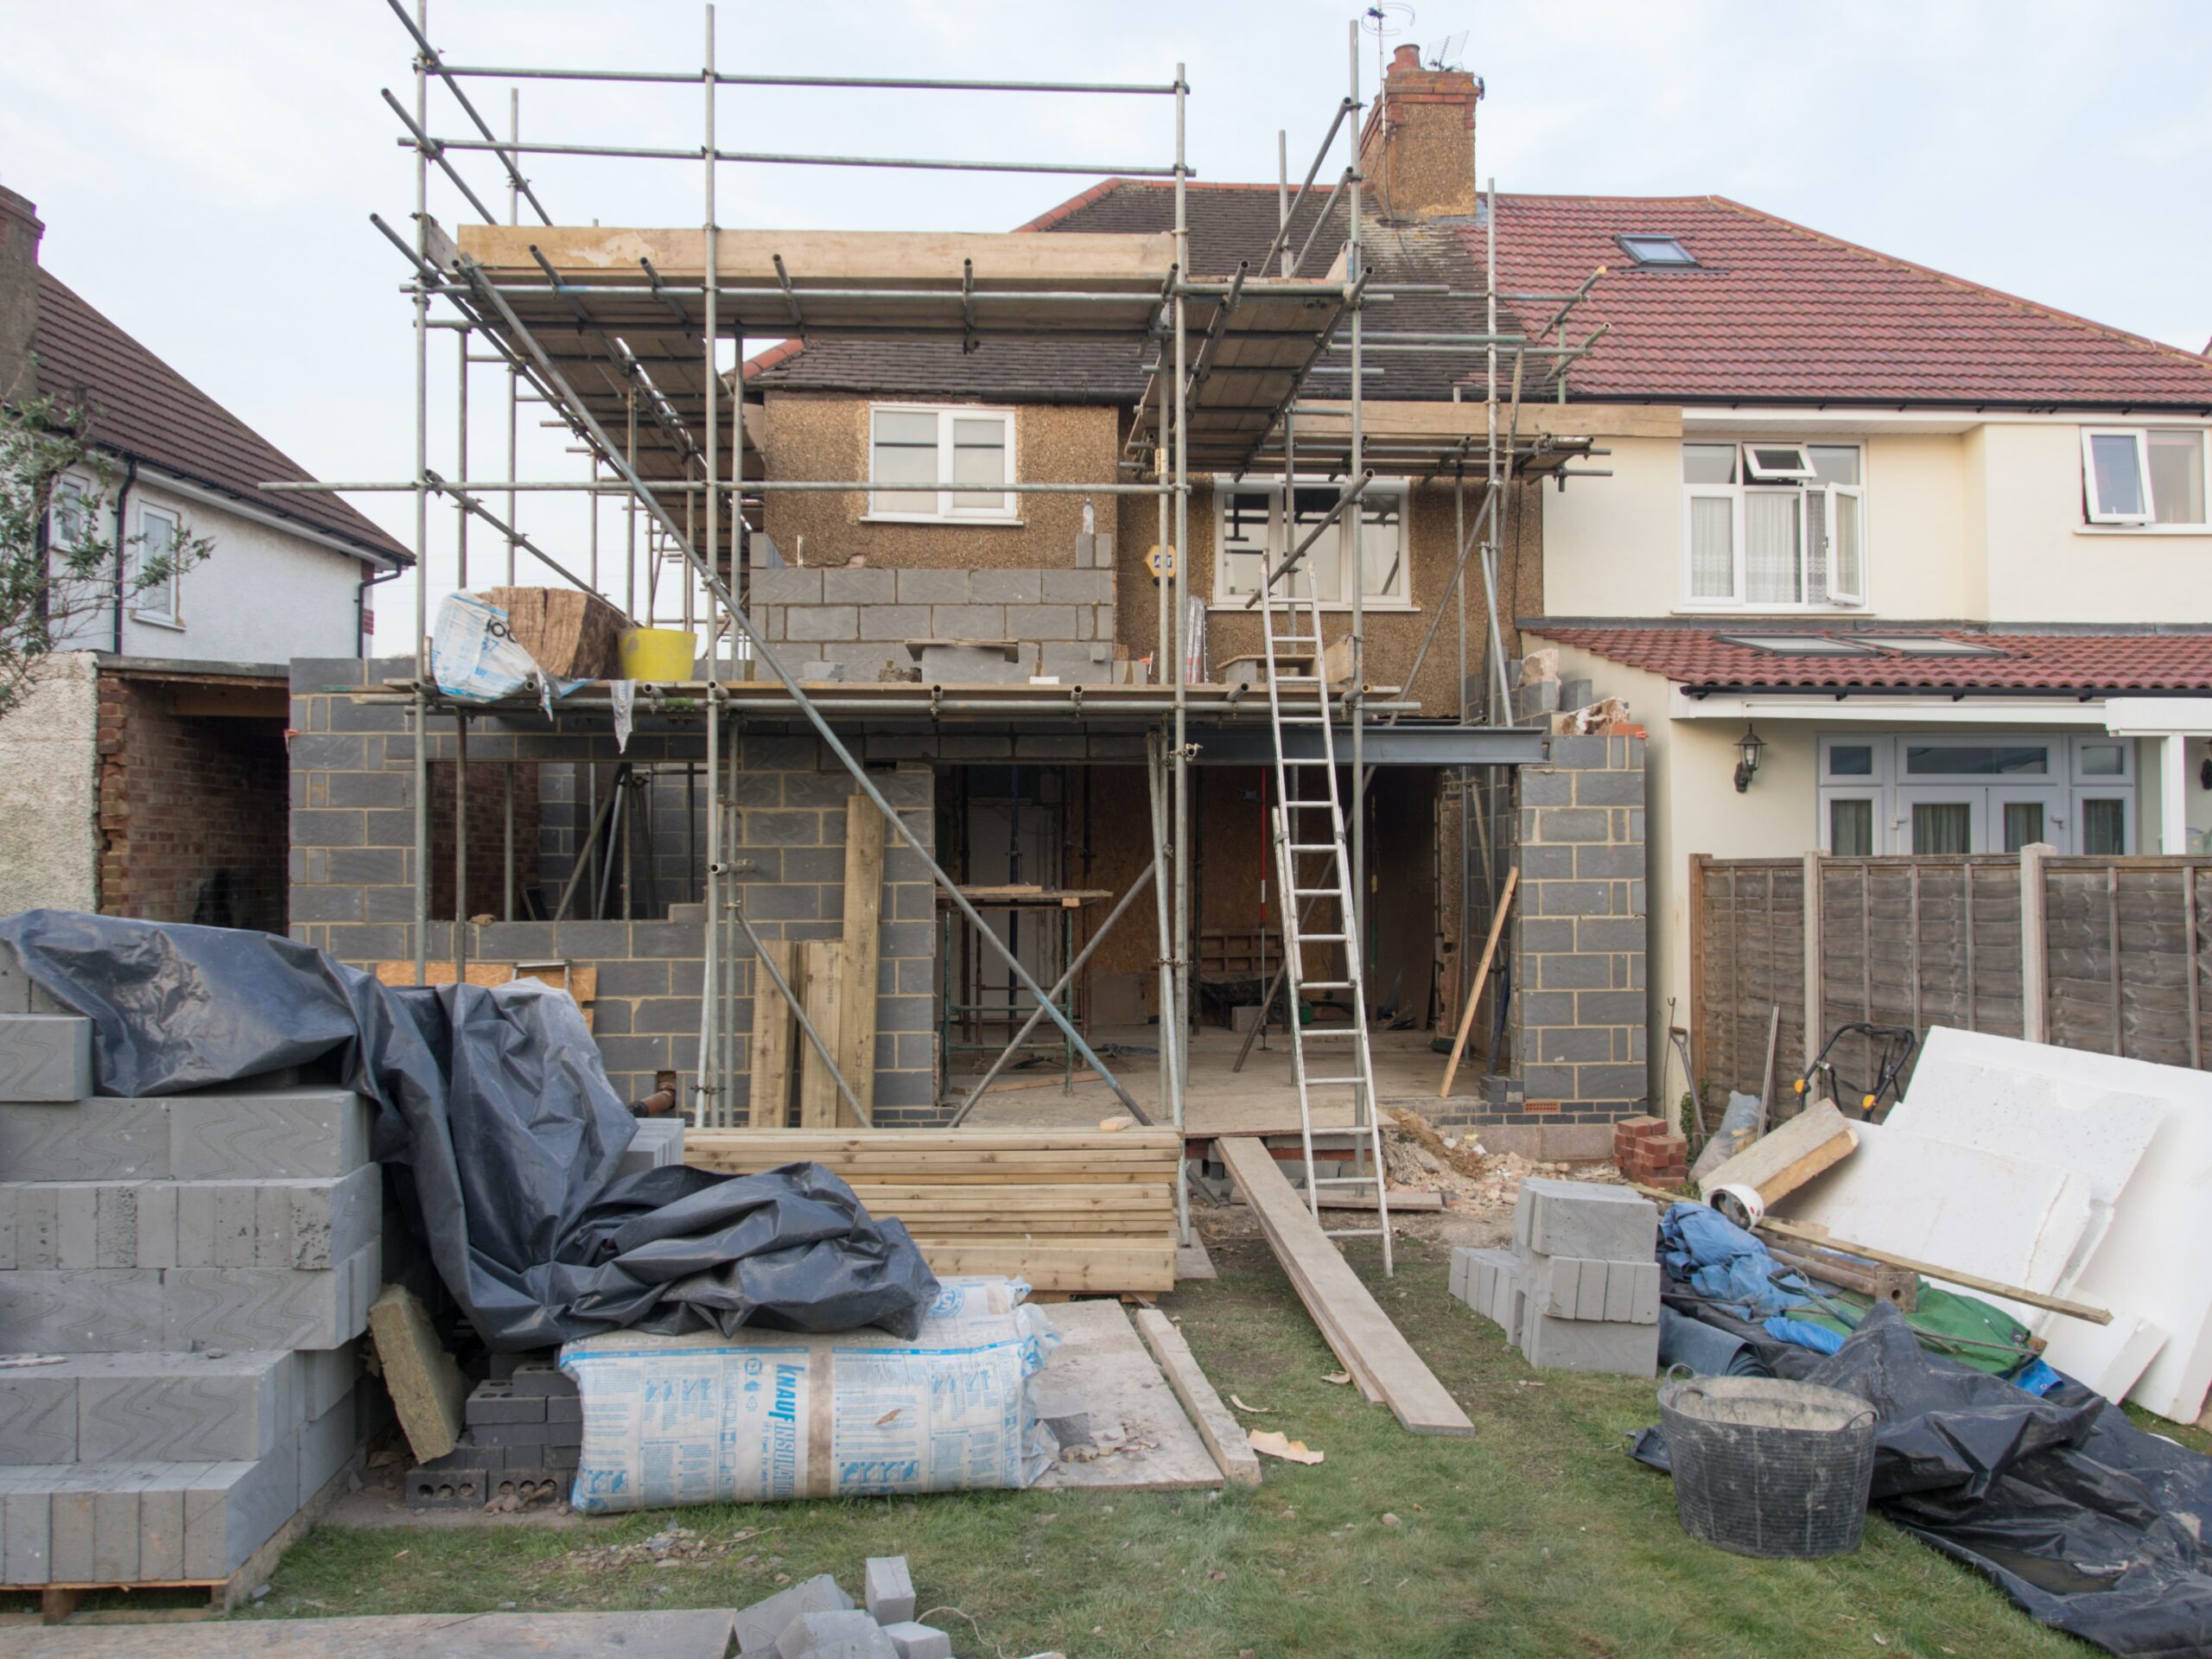 Self-build insurance course of construction